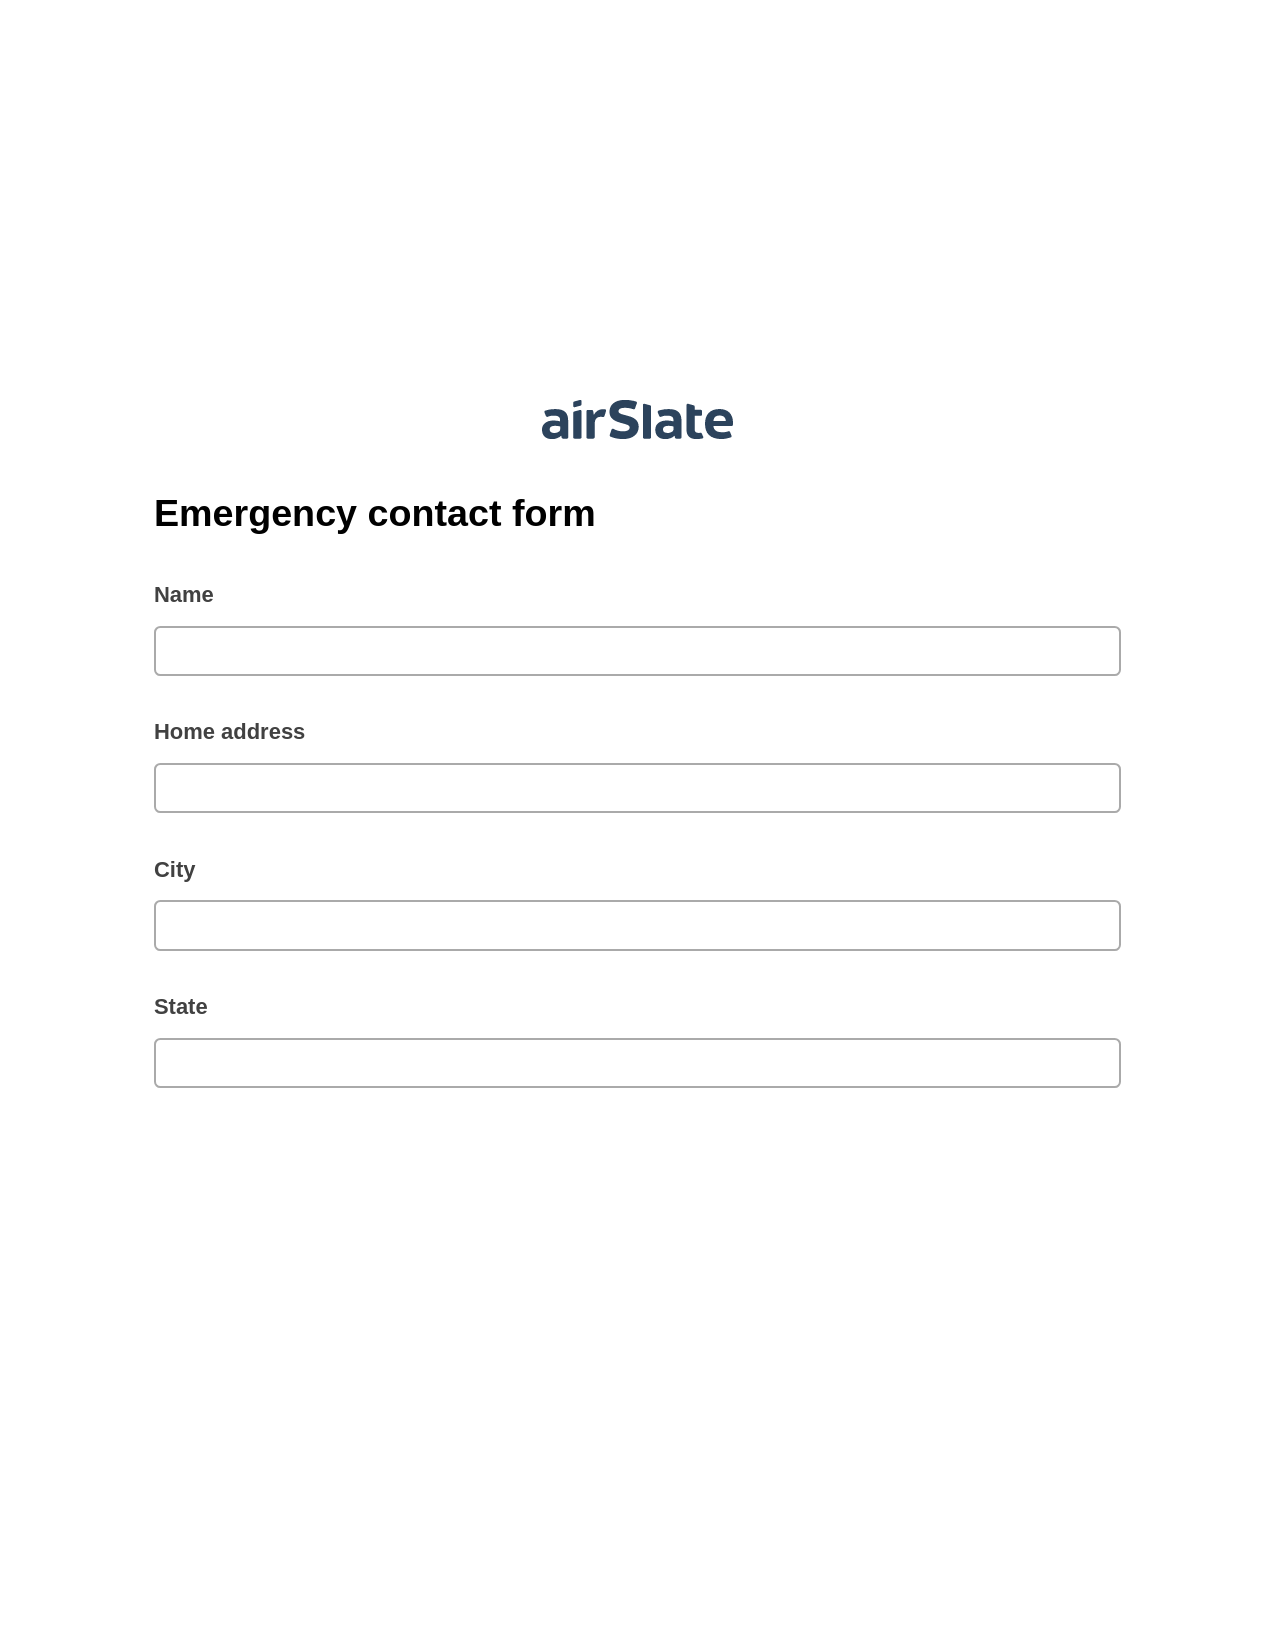 Multirole Emergency contact form Pre-fill from NetSuite Records Bot, Unassign Role Bot, Export to Excel 365 Bot